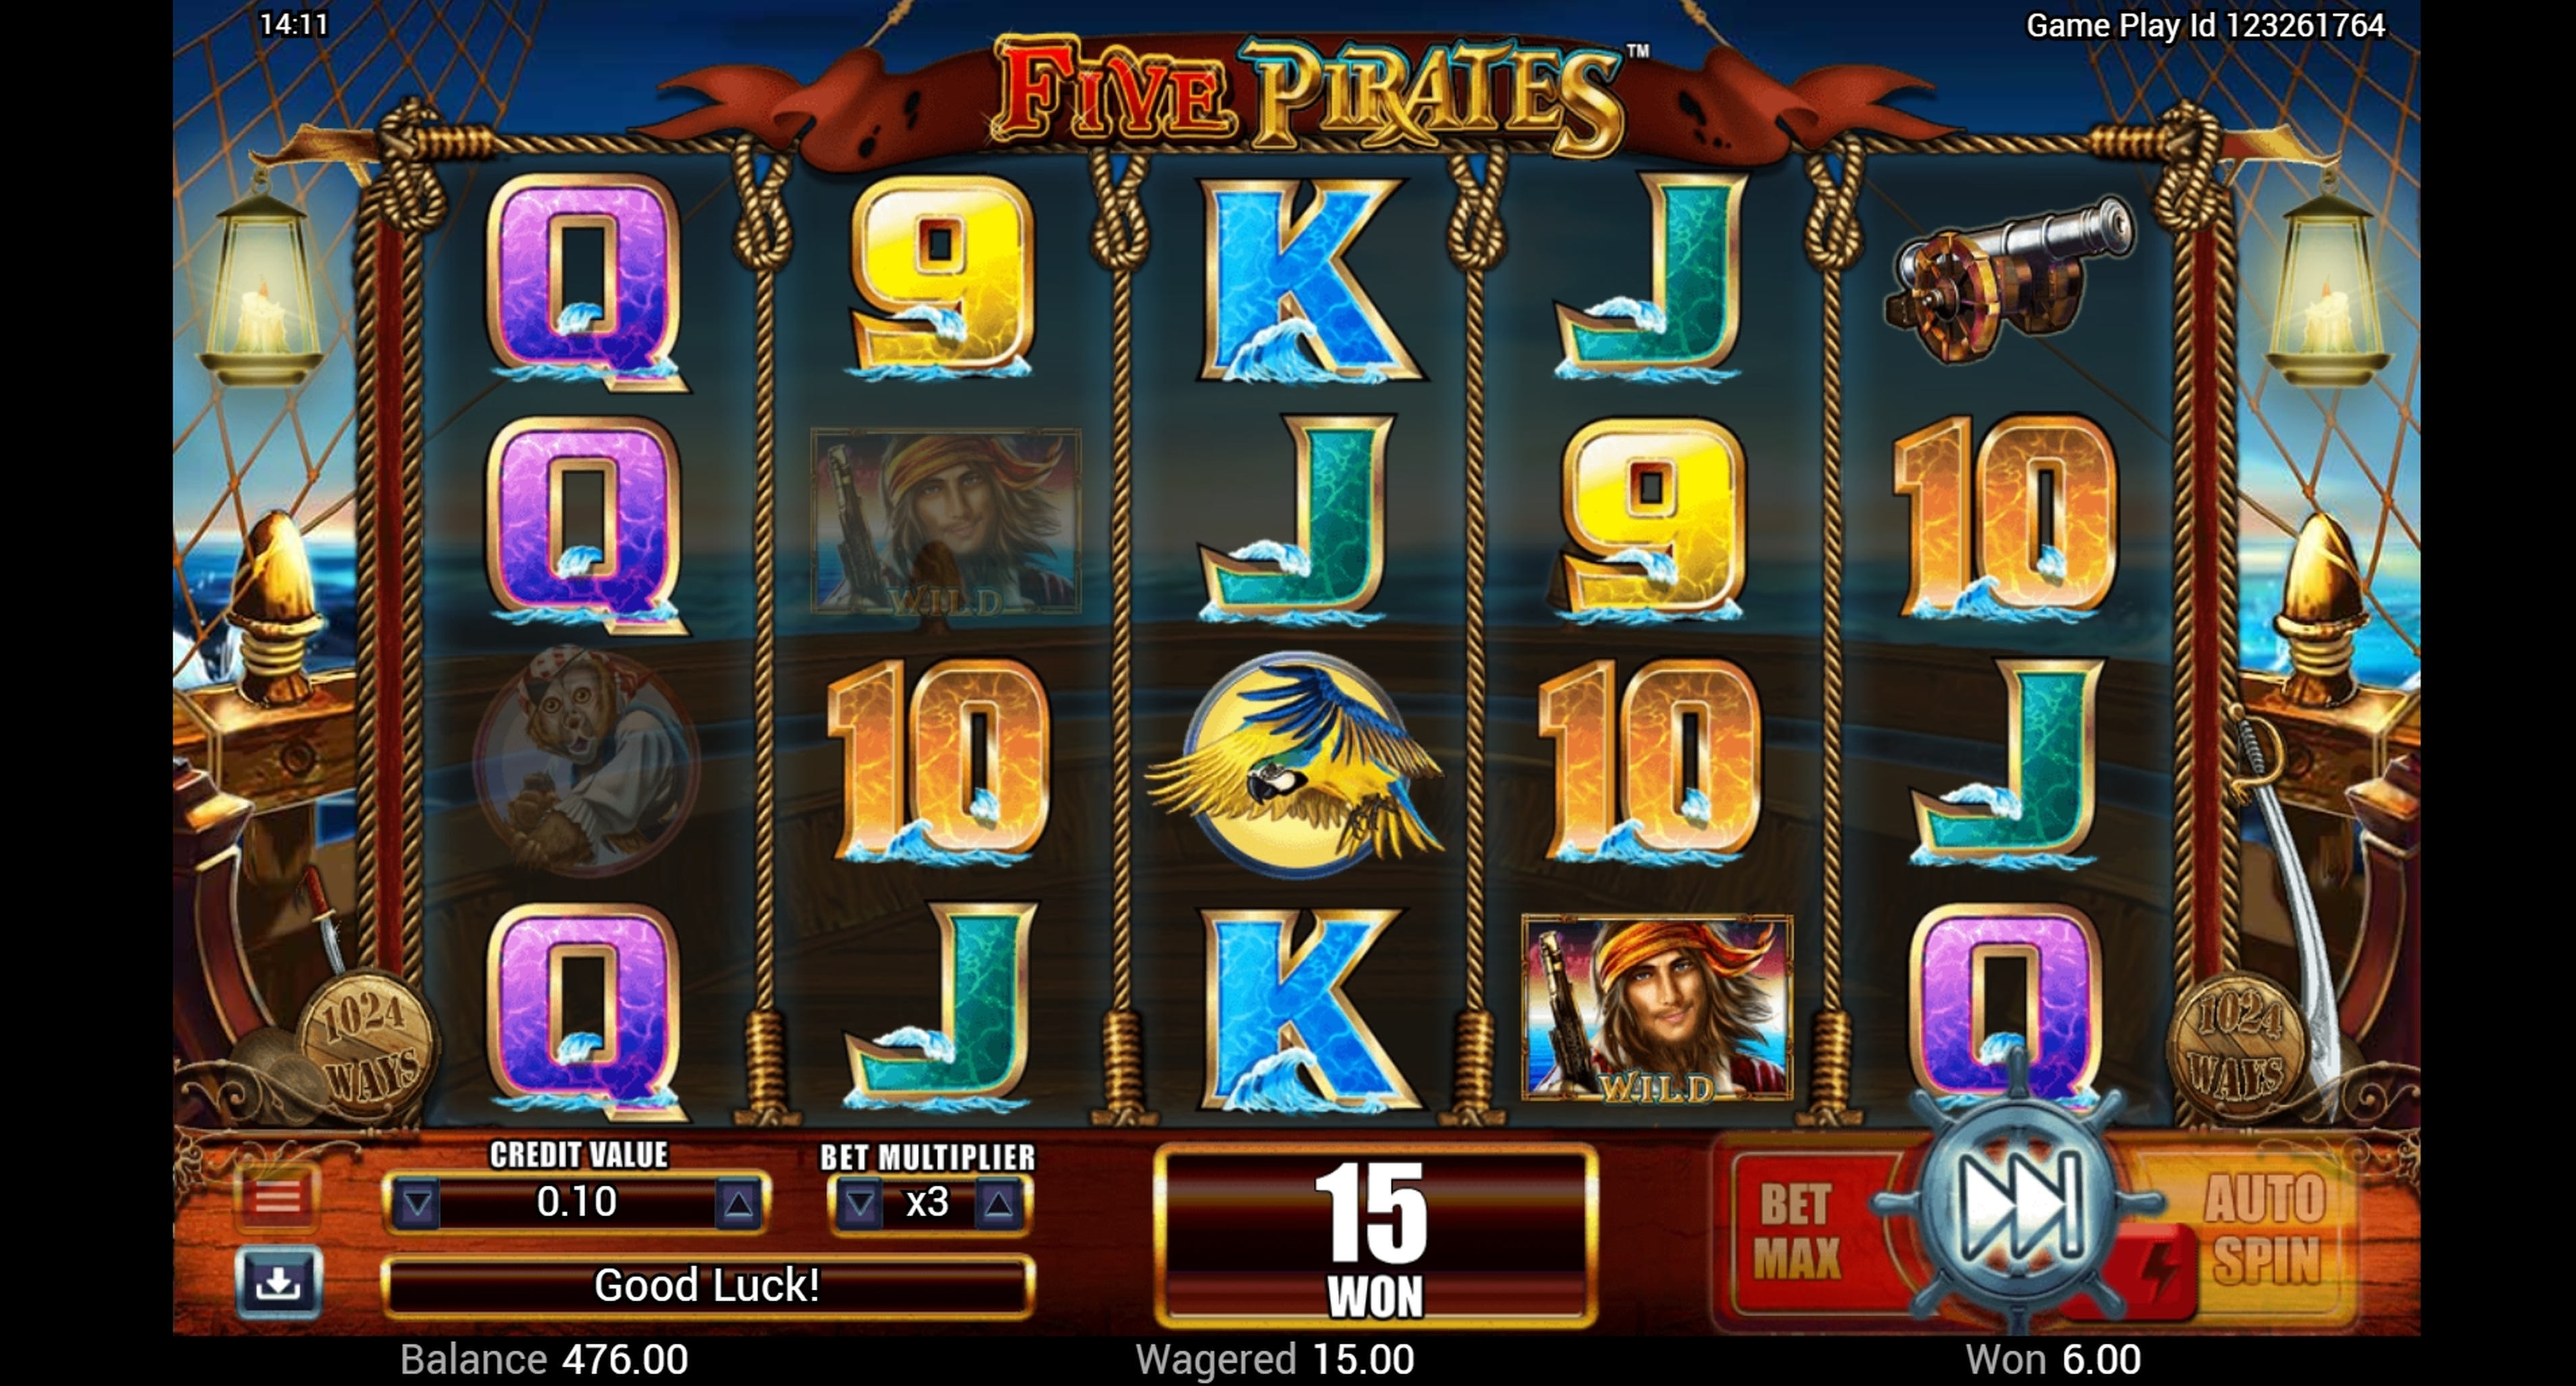 Win Money in Five Pirates Free Slot Game by Lightning Box